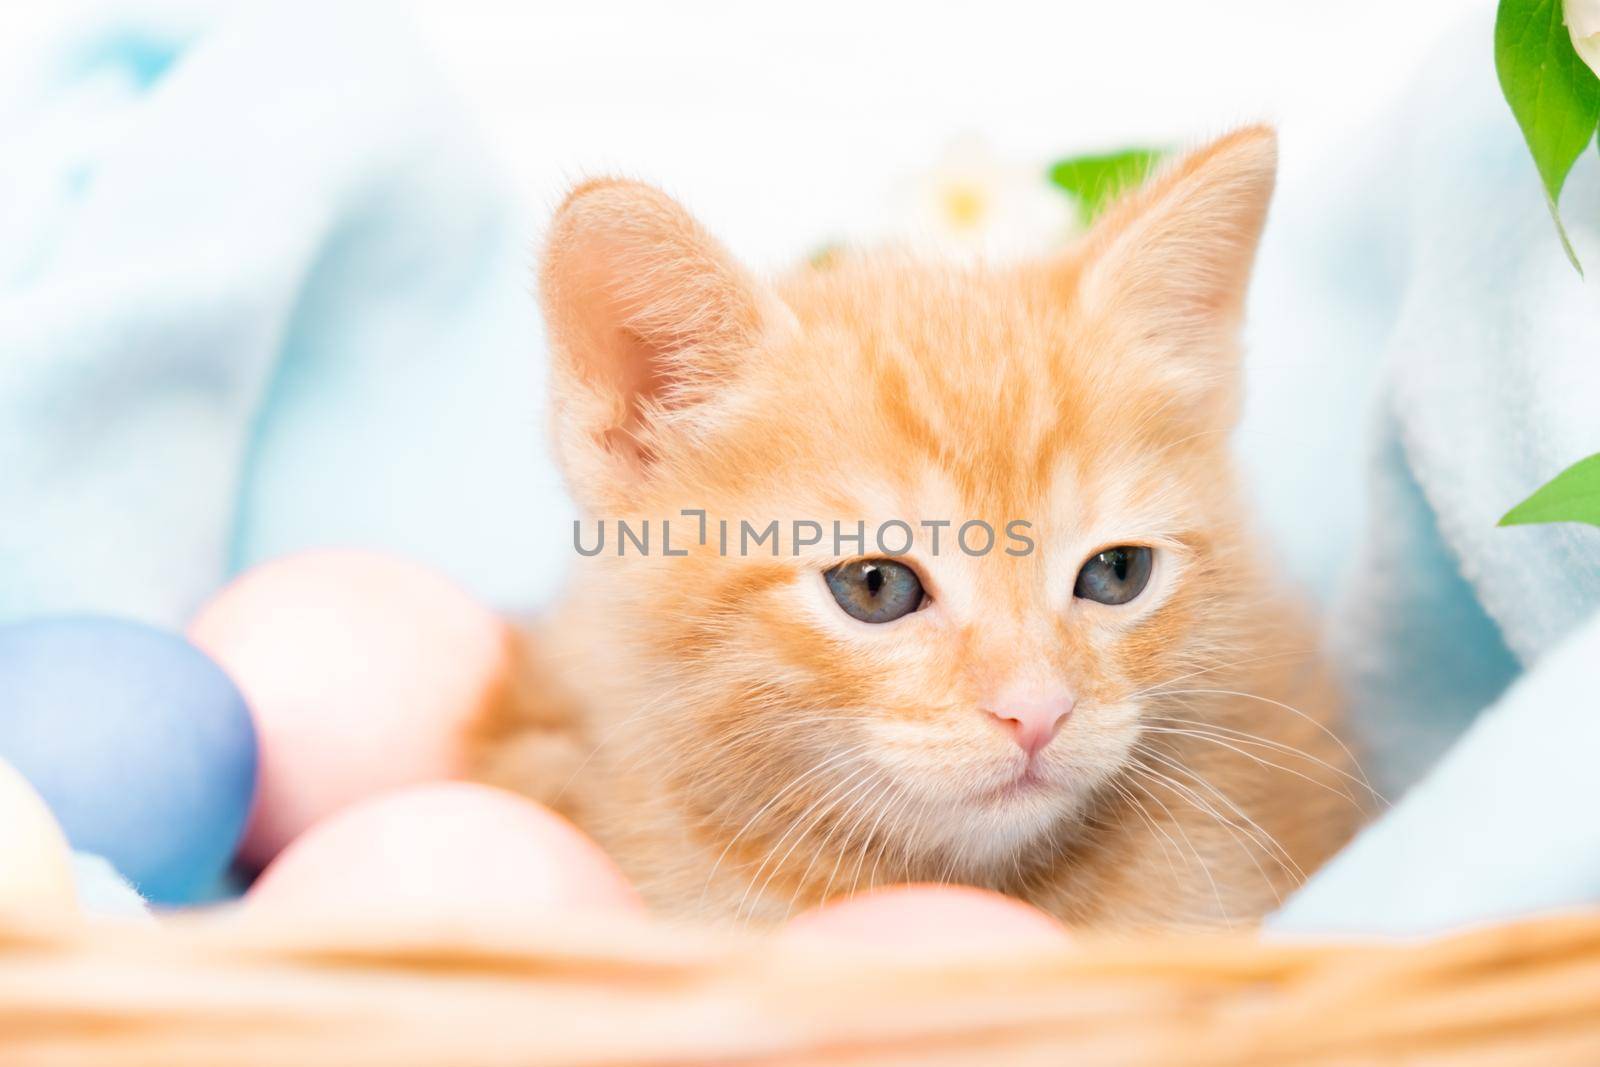 A small red tabby kitten lies comfortably in a blue blanket with easters eggs. Concept of taking care of pets, spring holidays, Easter.